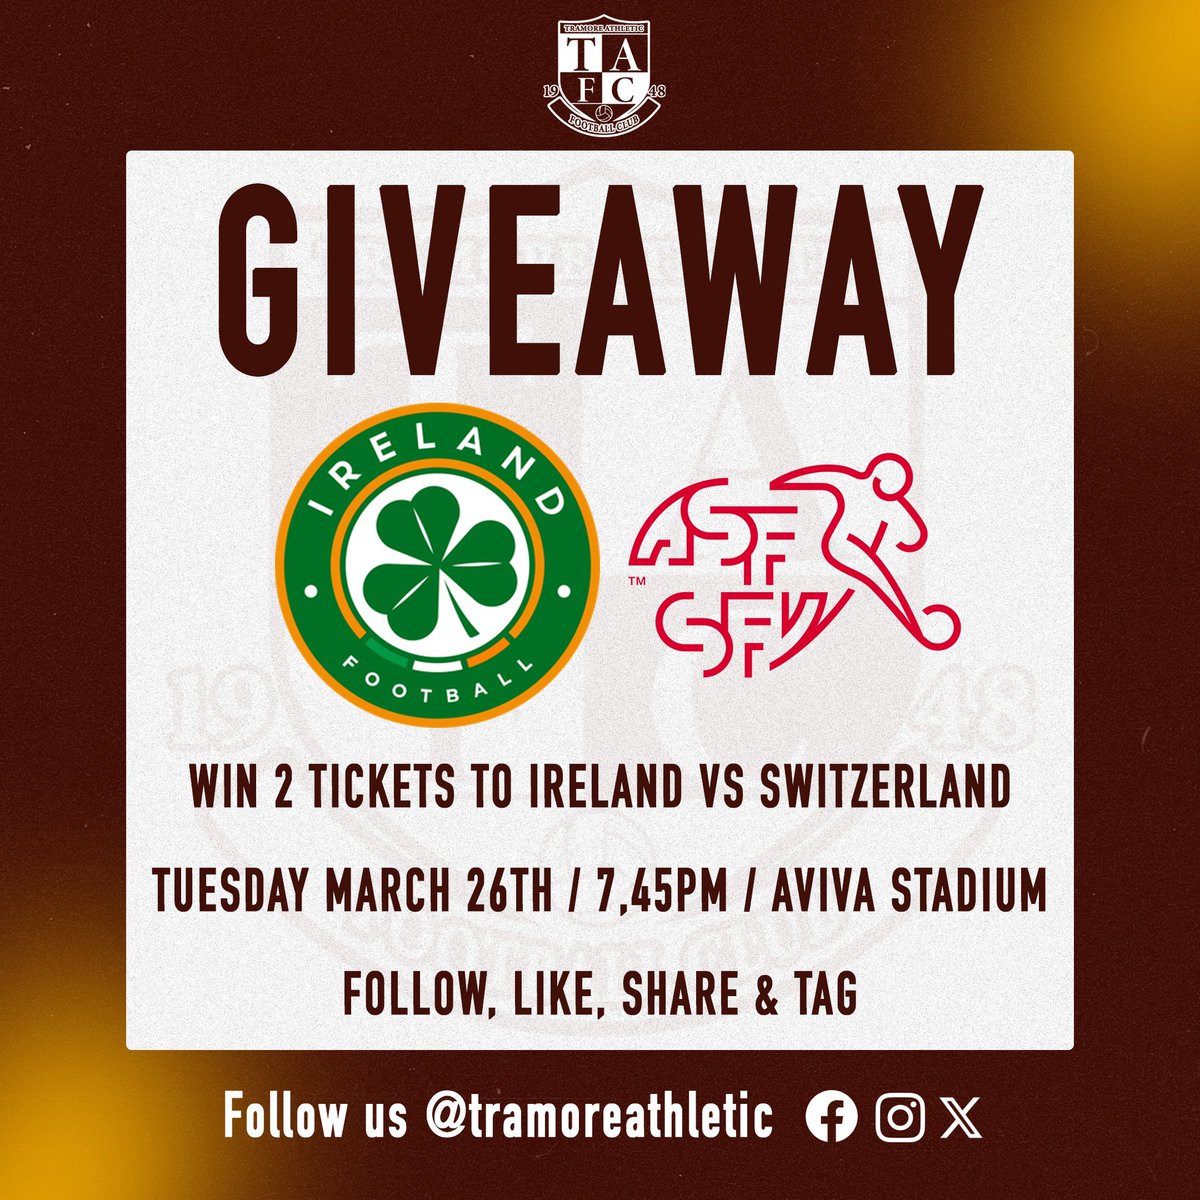 Competition Time ☘️ We have 2 tickets to give away for the Ireland vs Switzerland game on Tuesday March 26th at 7.45pm in the Aviva Stadium 🇮🇪 To enter: 📍Follow us 📍Like and RT this post 📍Tag who you’d bring below Best of luck 🤞 #TAFC #COYBIG